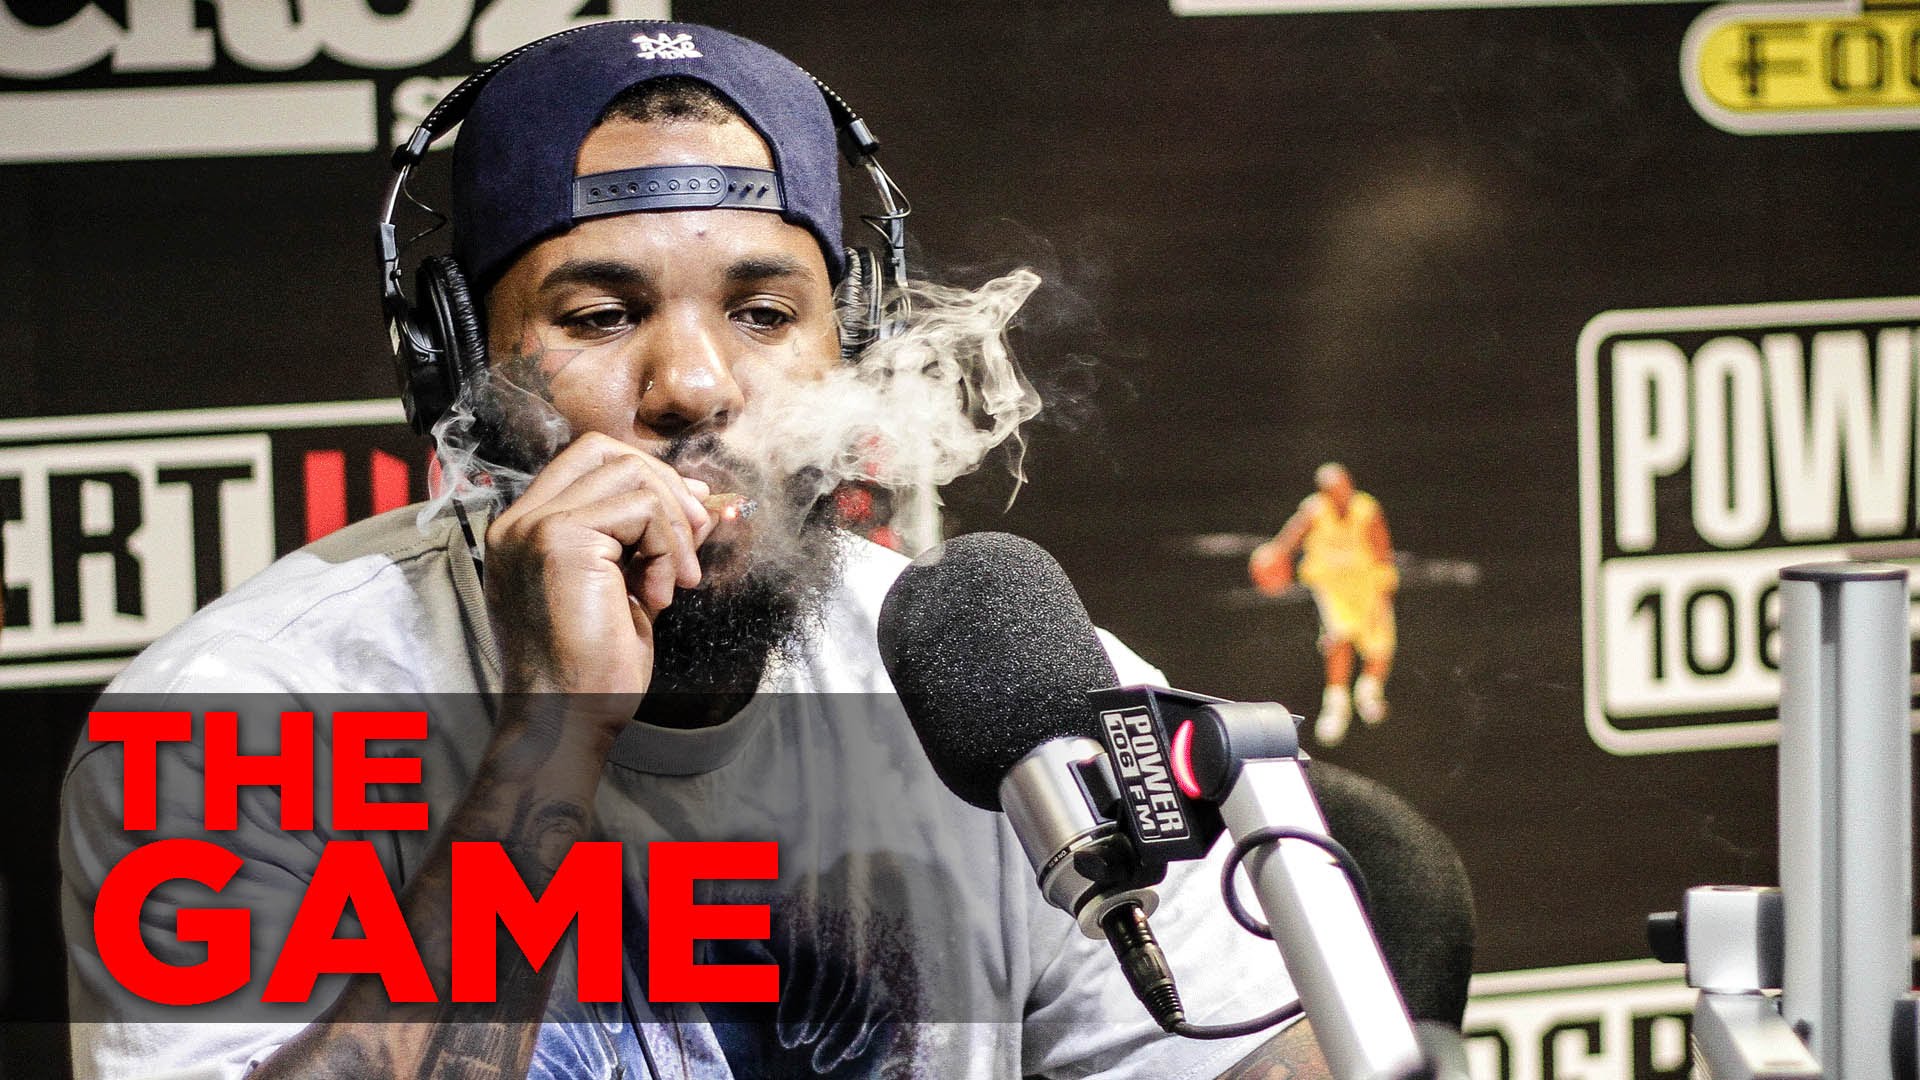 The Game Spits ‘Breakfast Bars’ On The Cruz Show